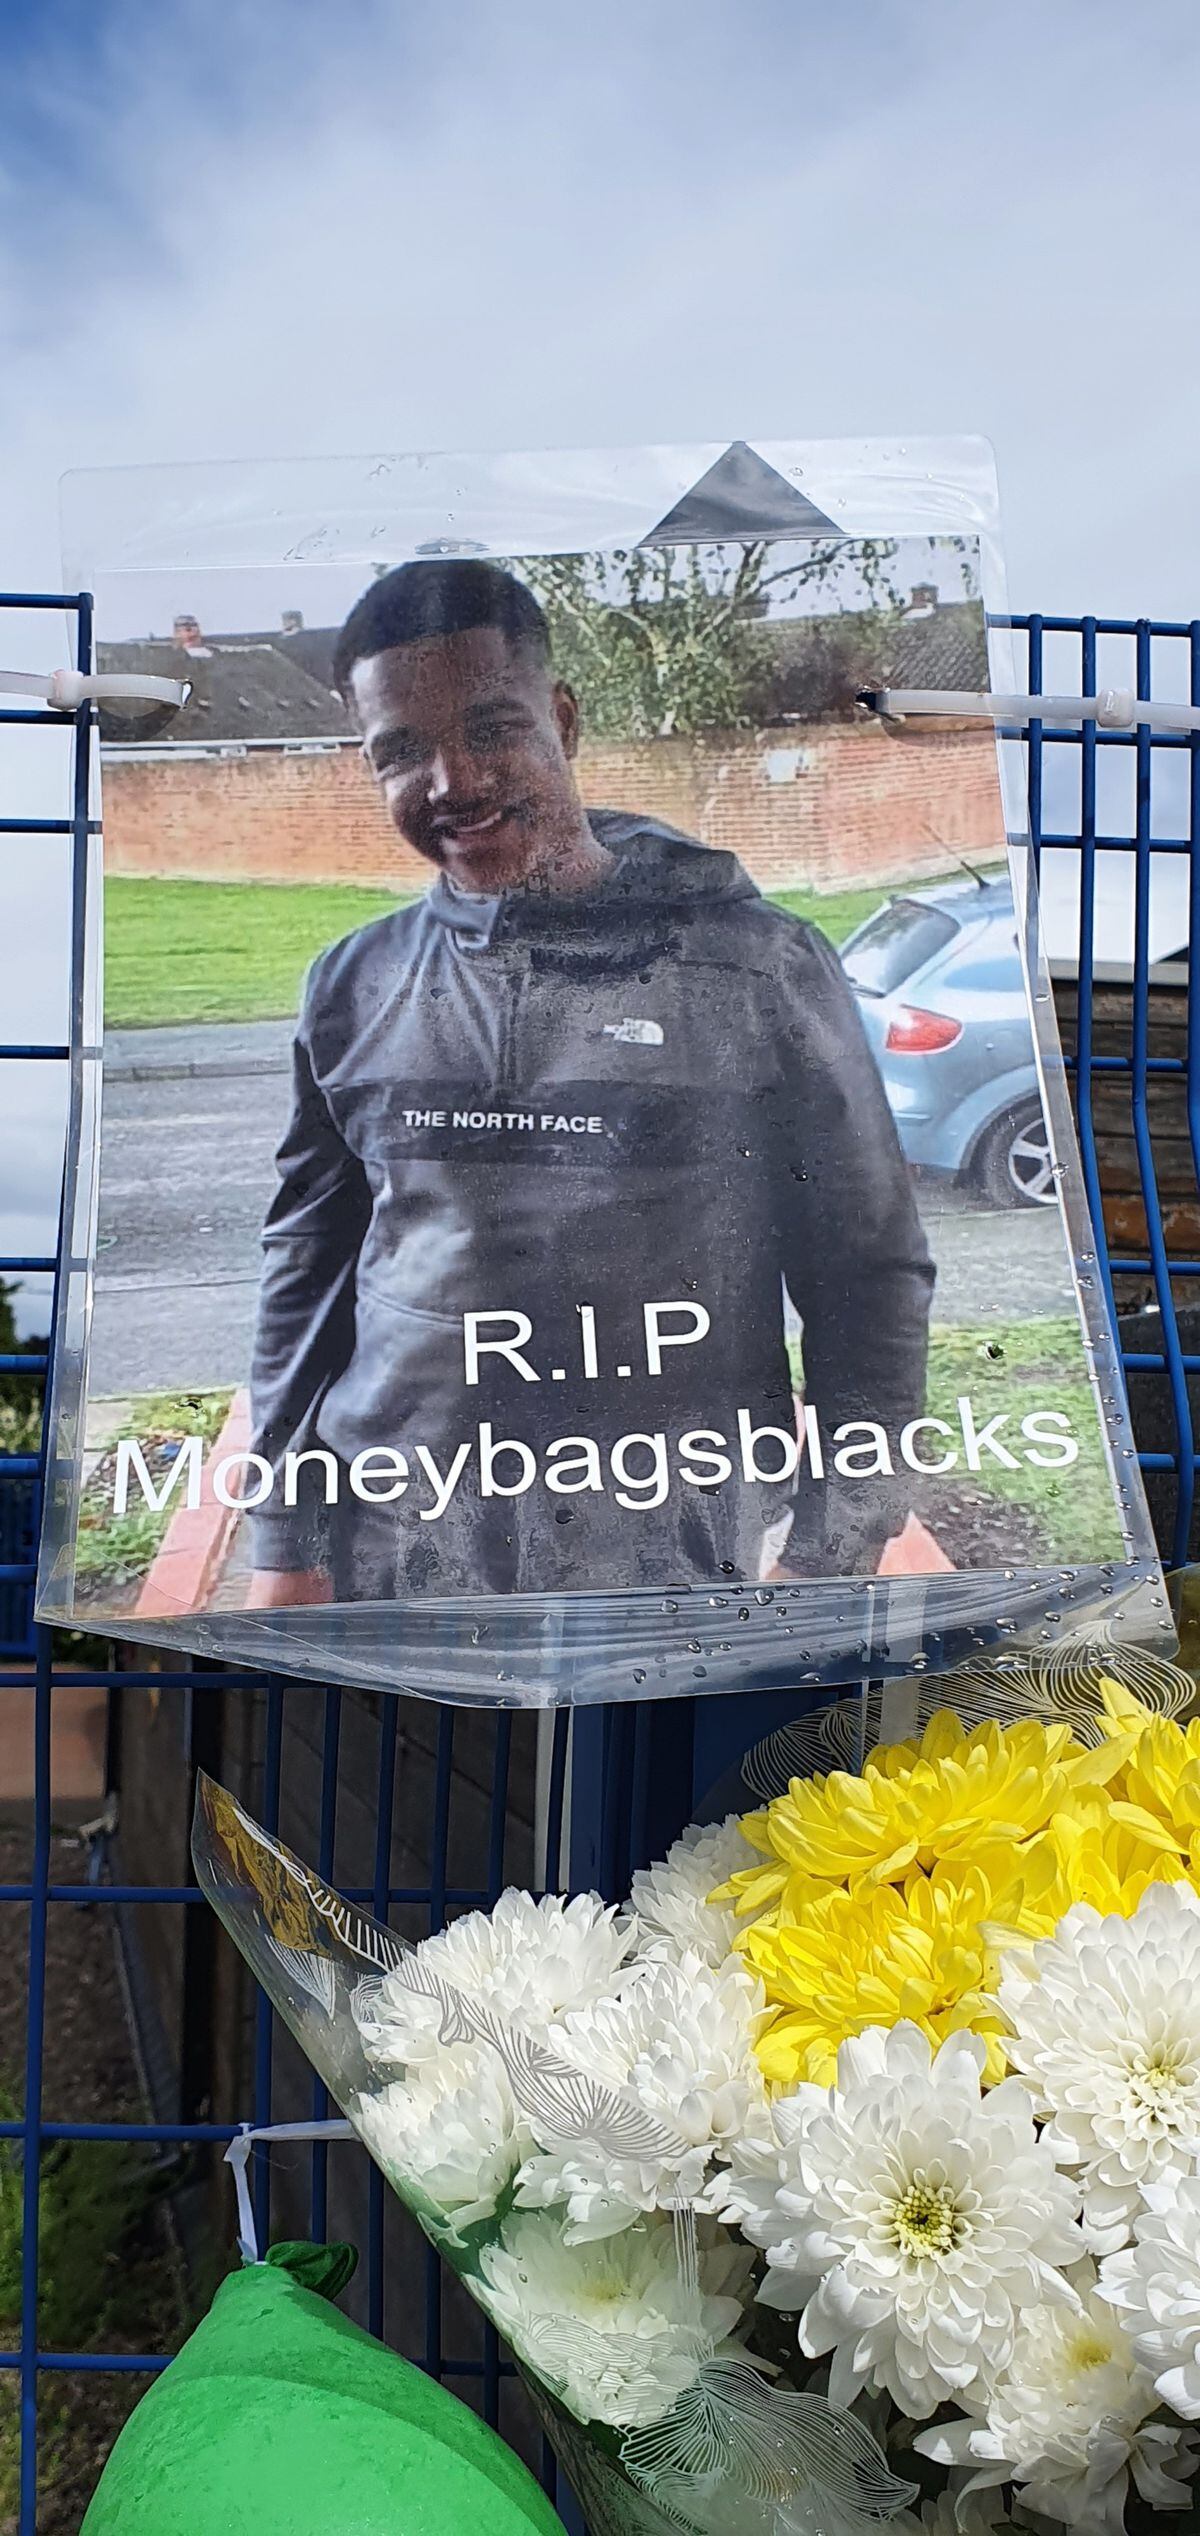 Images of the 21-year-old, known locally as Blacks, were put up in tribute